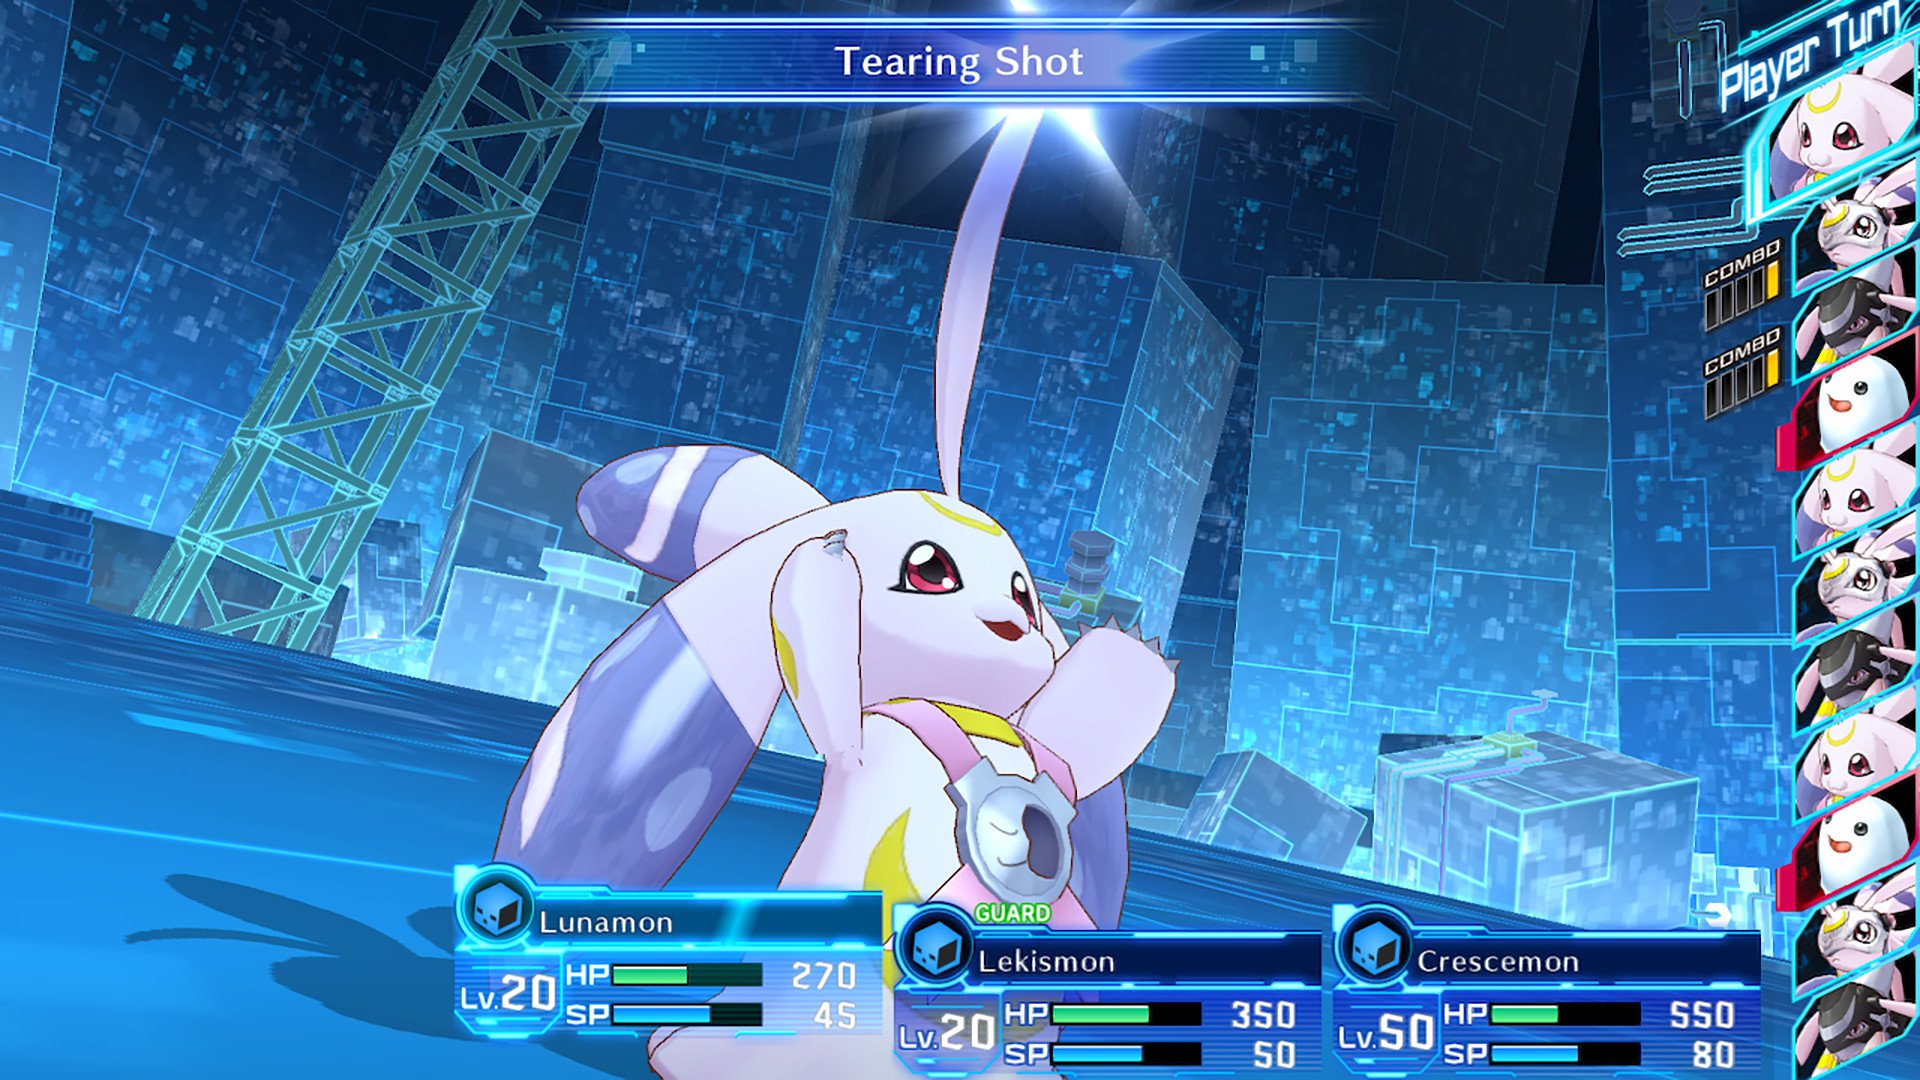 Digimon Story Cyber Sleuth Complete Edition 2